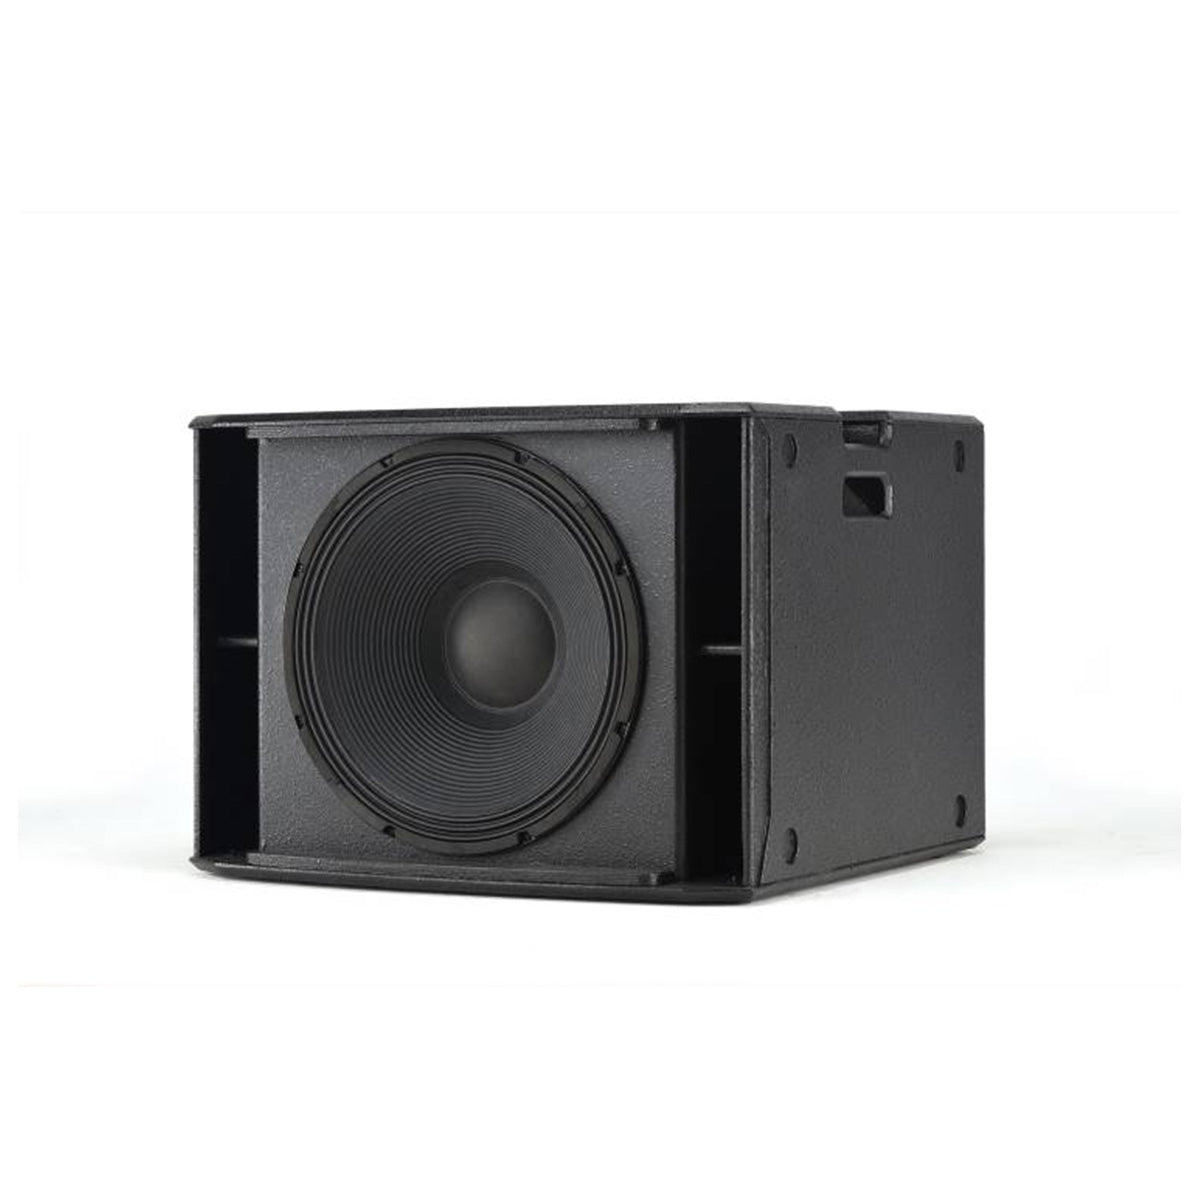 dBTechnologies Sub 918 Active Subwoofer 18inch 900W RMS / 1800W Peak